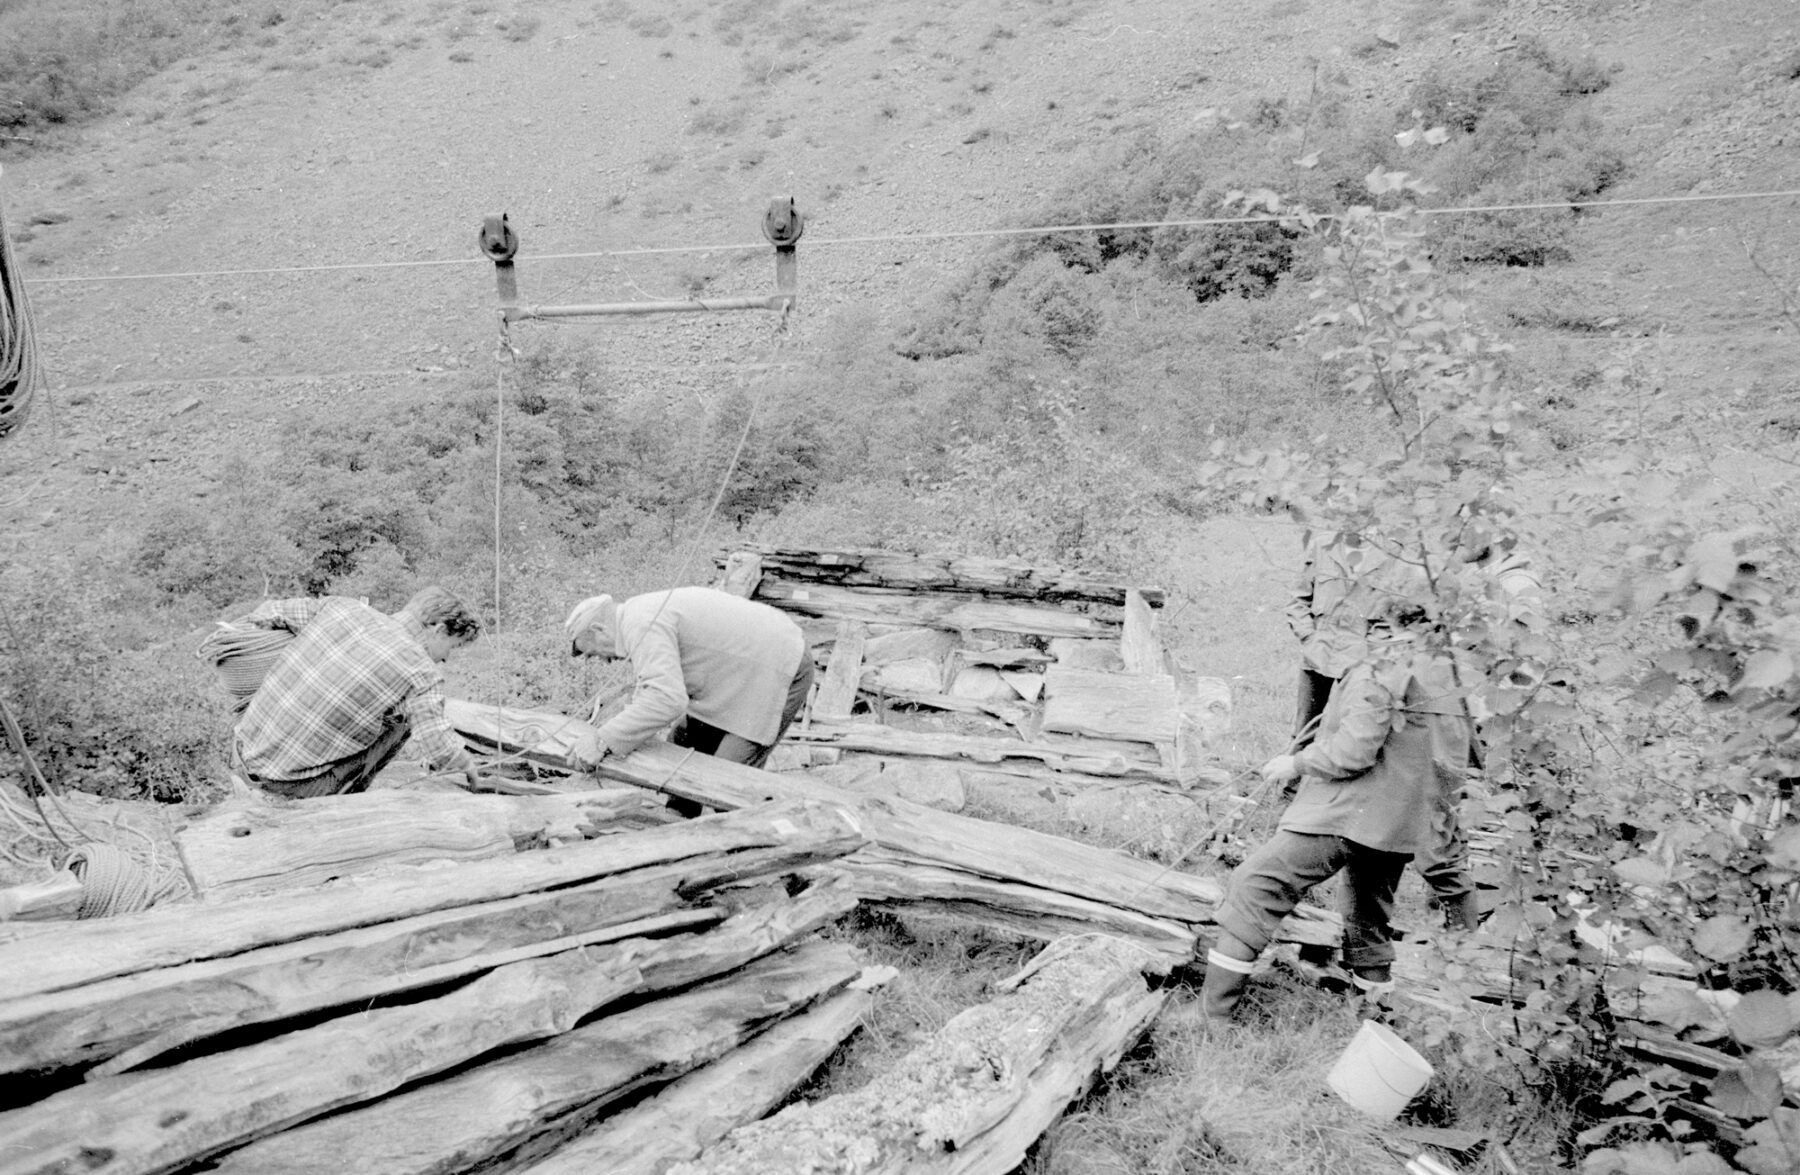 A team of volunteers used cables to move parts of the hut down the mountainside.